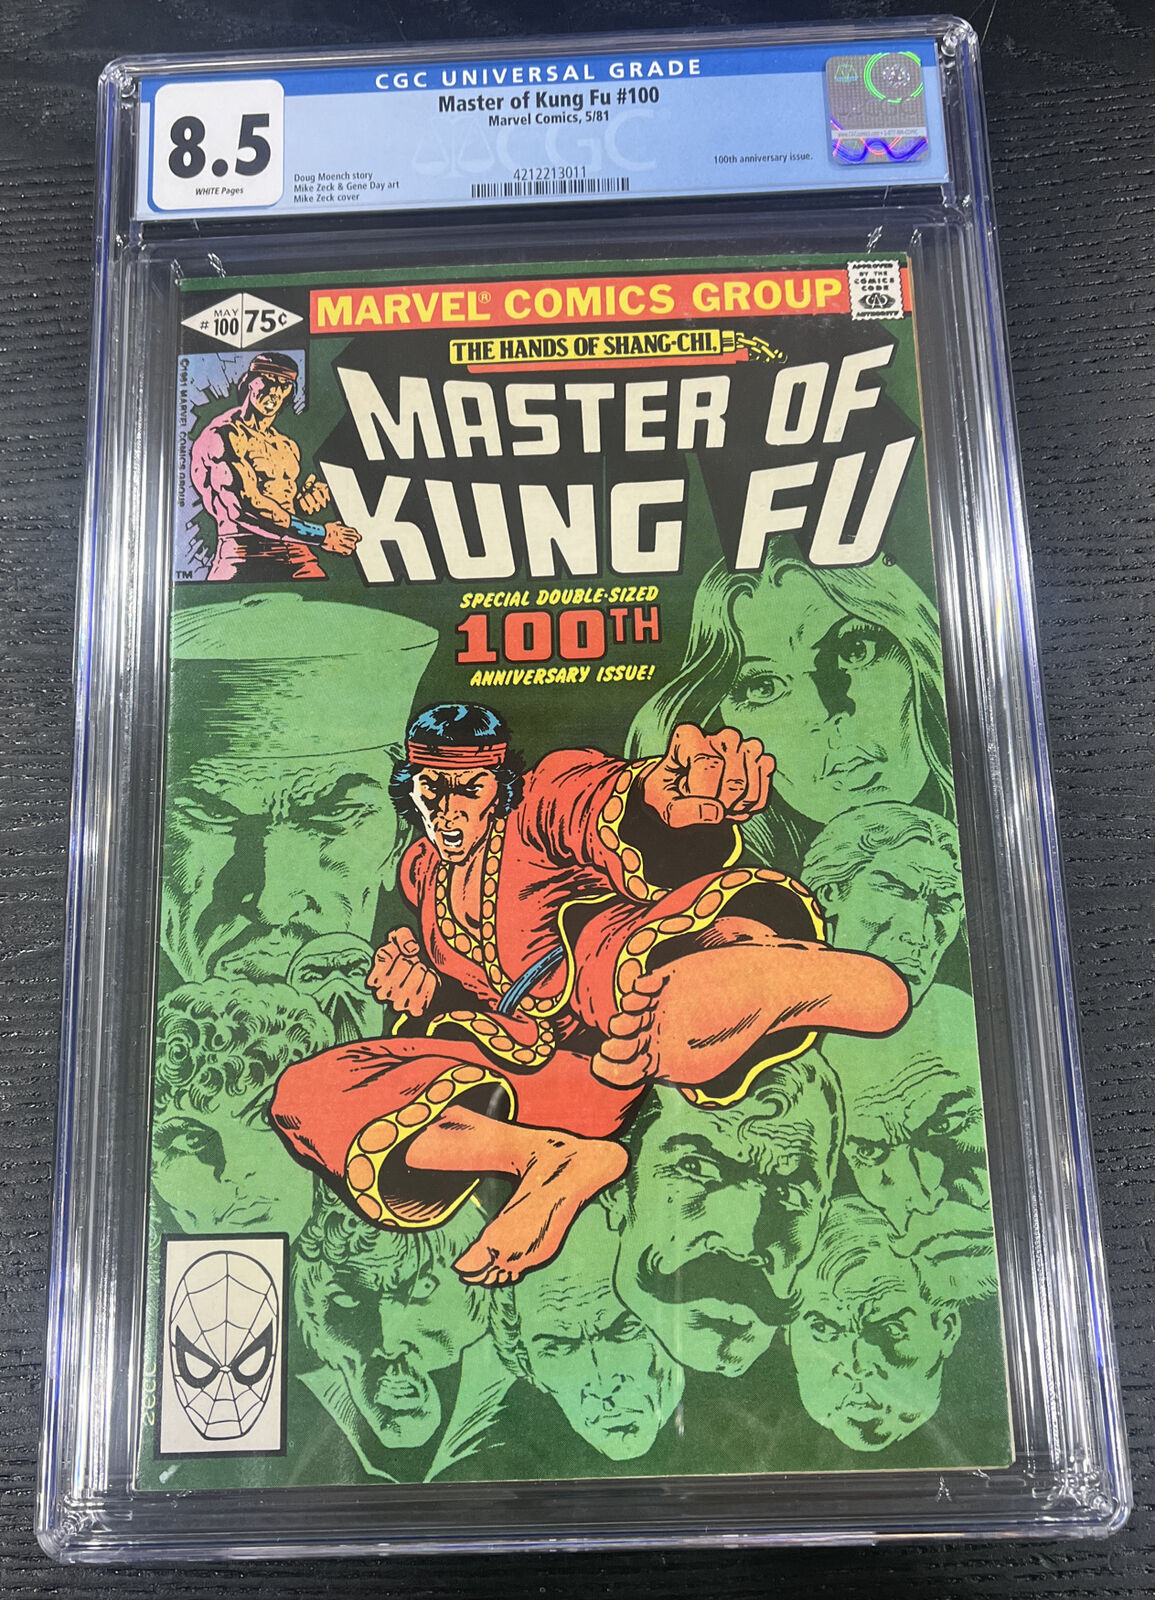 1981 MASTER OF KUNG FU #100 - CGC 8.5 - WP NM/MT - NEWSSTAND - SHANG CHI Comic